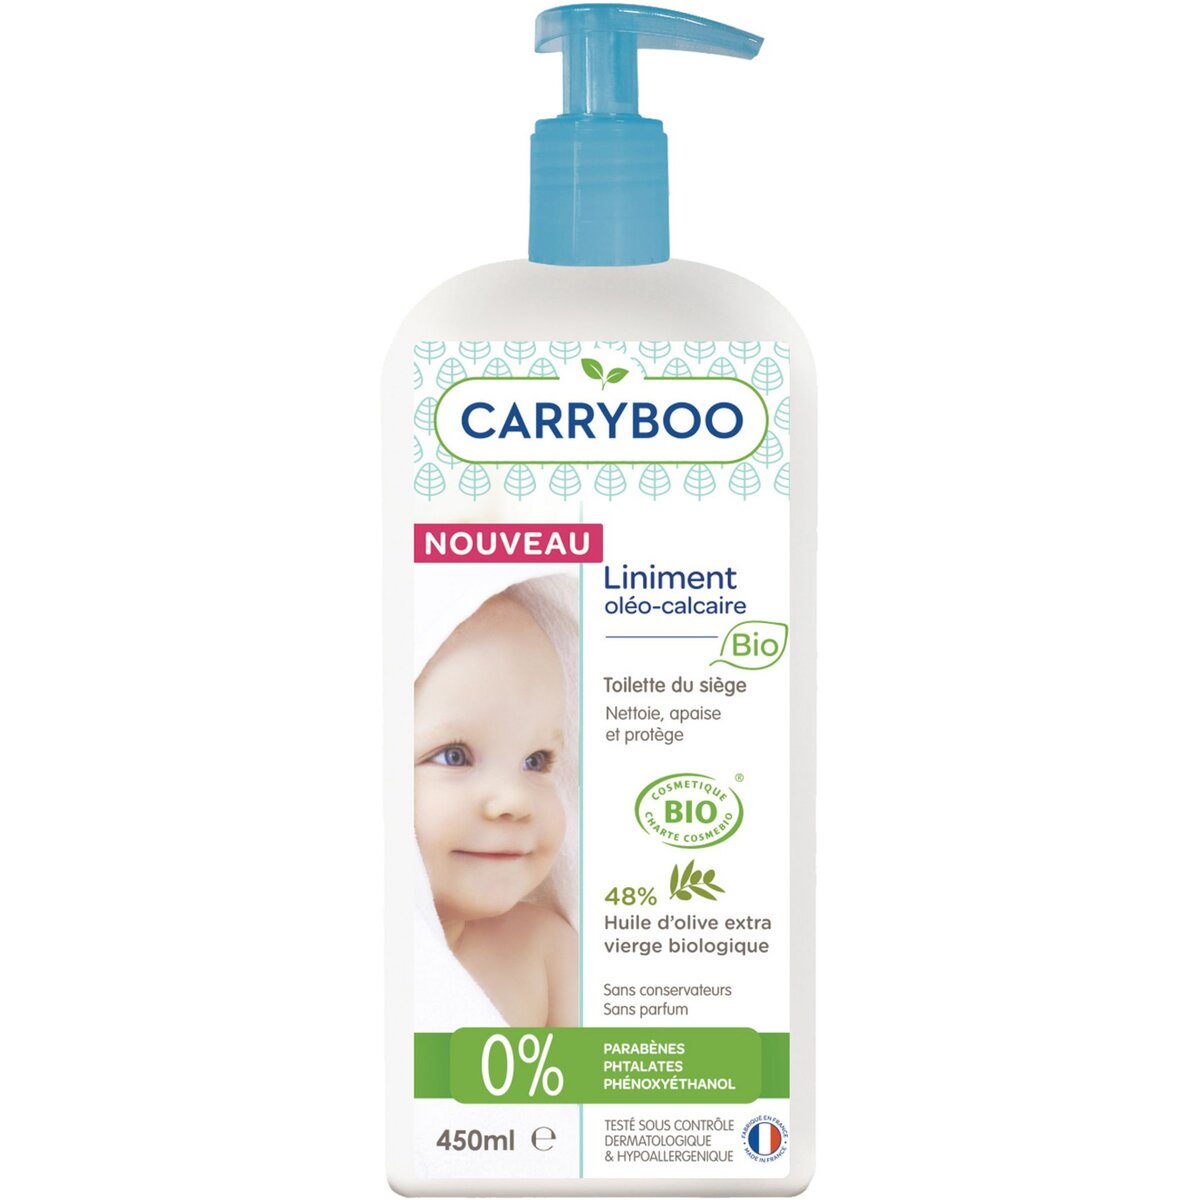 CARRYBOO Liniment oléo-calcaire à l'huile d'olive extra vierge bio 450ml